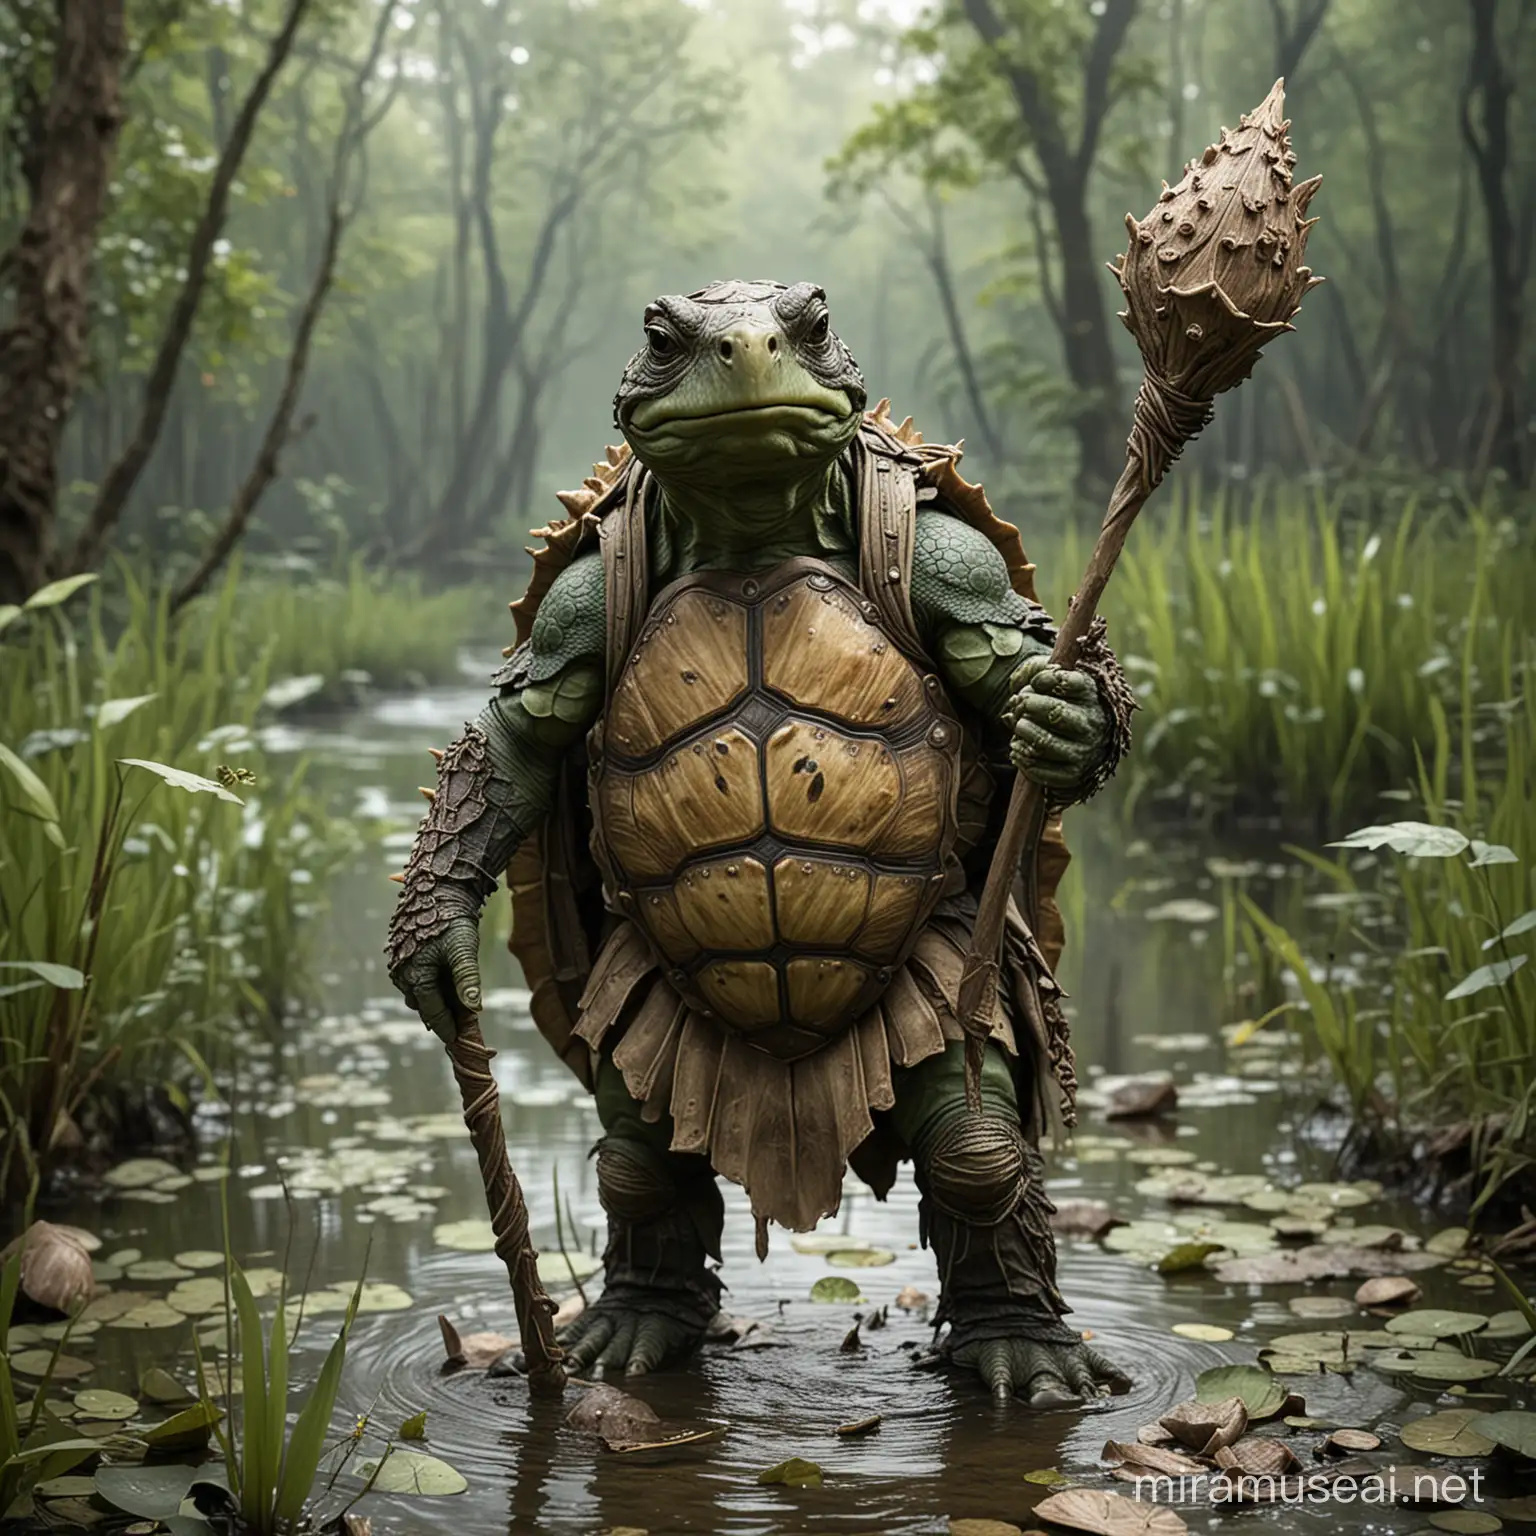 A tortle druid holding a staff with a Knobby end and a weathered shell on his back. Standing in a swamp 
 